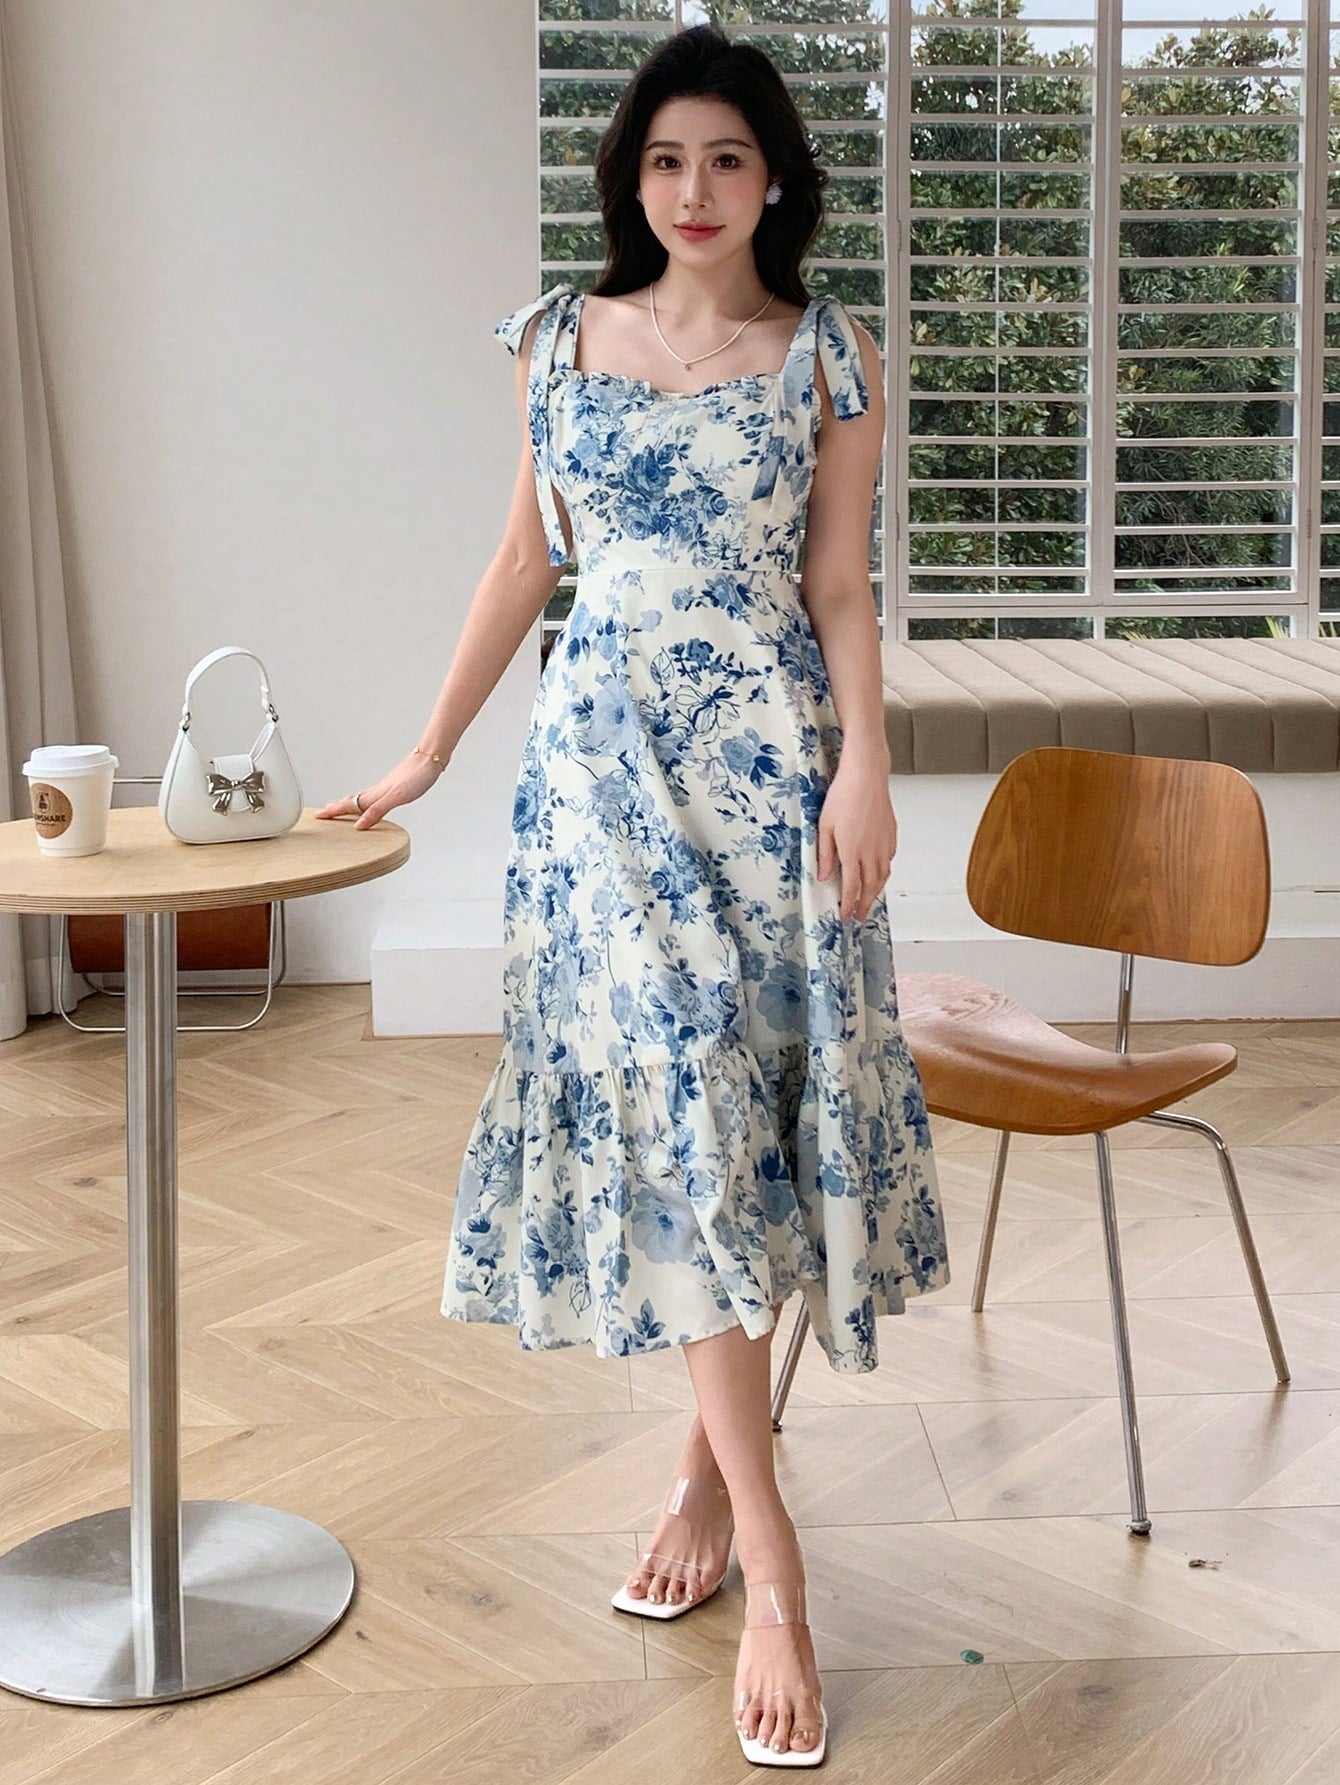 Women Summer Vacation Style Floral Printed Halter Fish Tail Dress